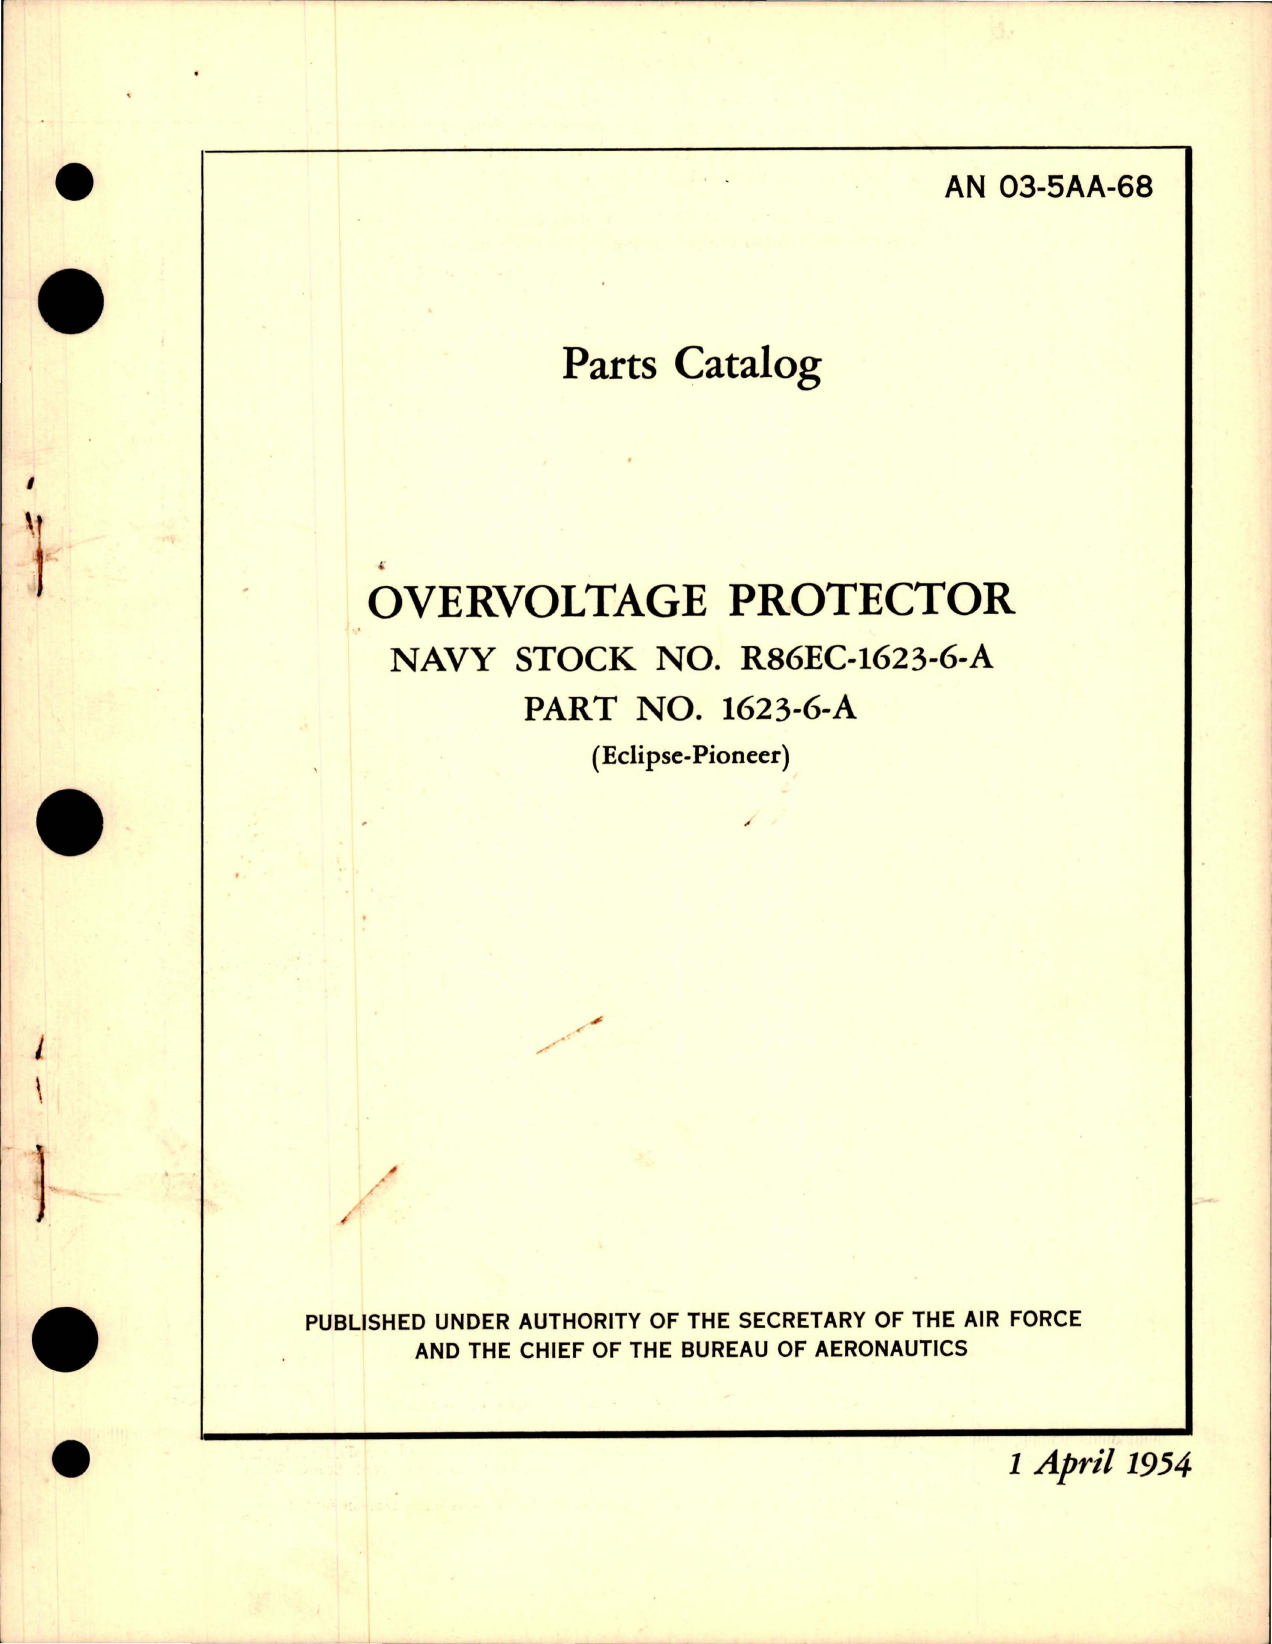 Sample page 1 from AirCorps Library document: Parts Catalog for Overvoltage Protector - Stock R86EC-1623-6-A - Parts 1623-6-A